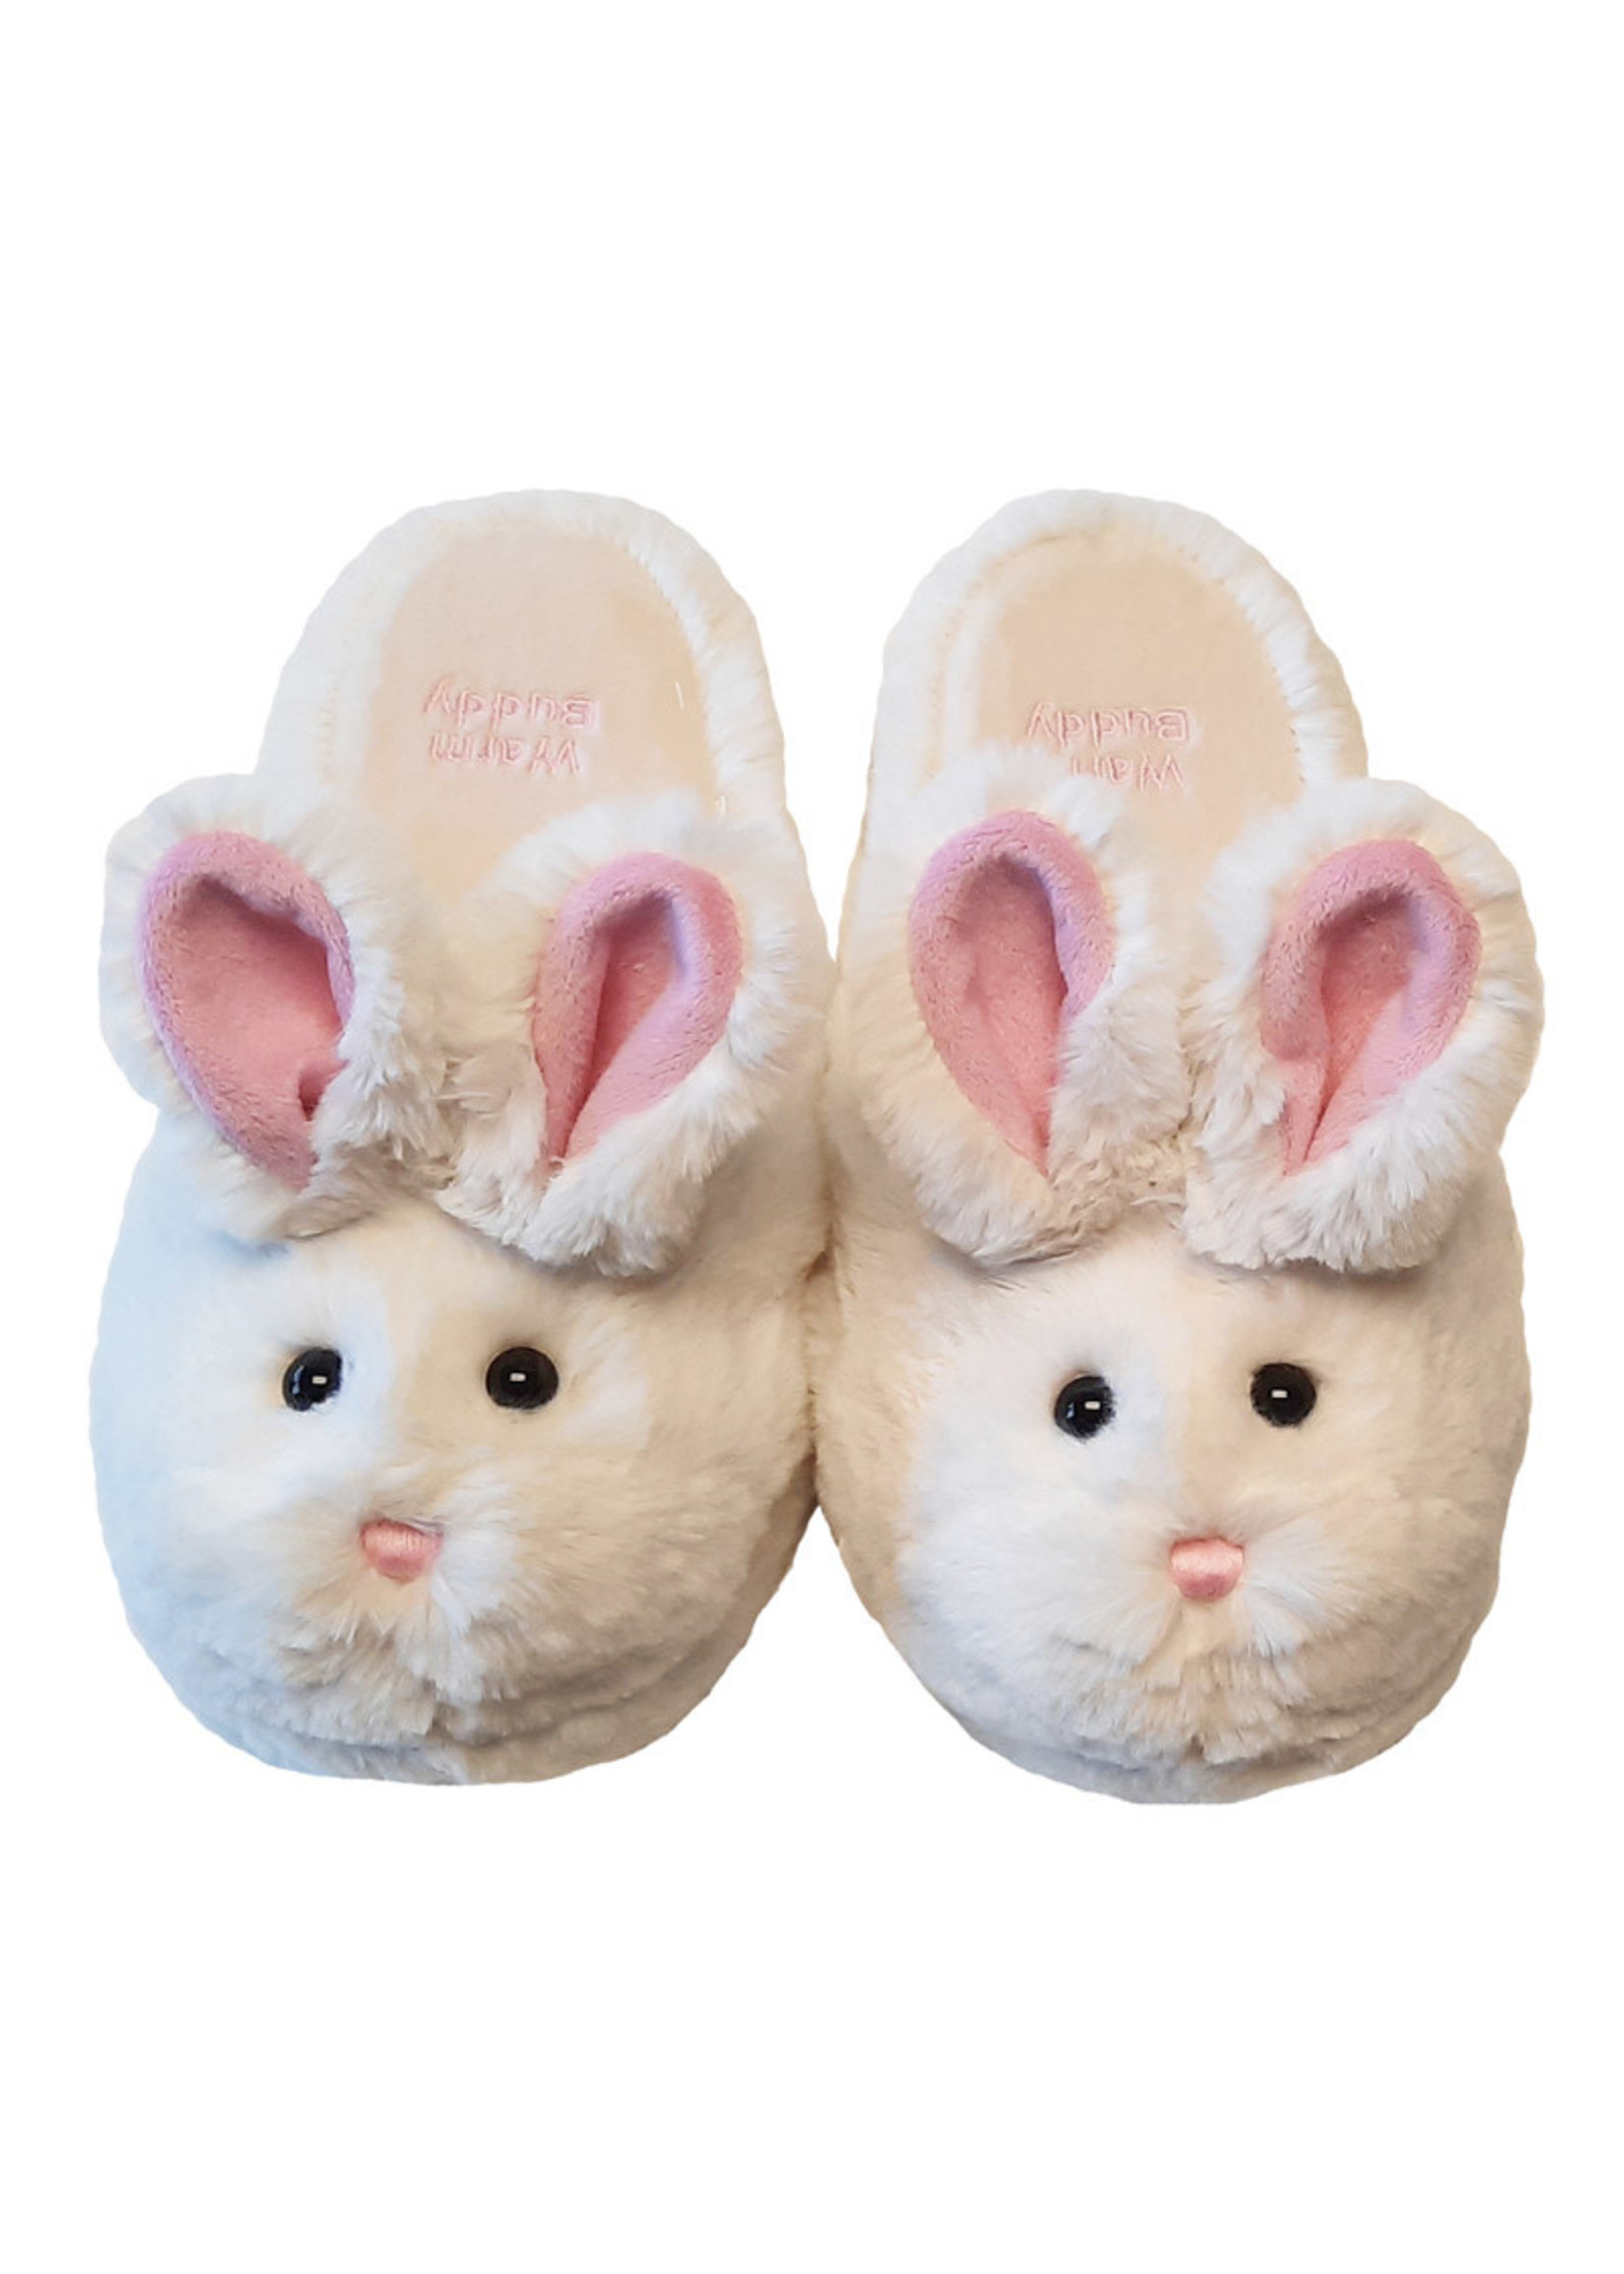 Warm Buddy Small Bunny Slippers - Small size 4-5